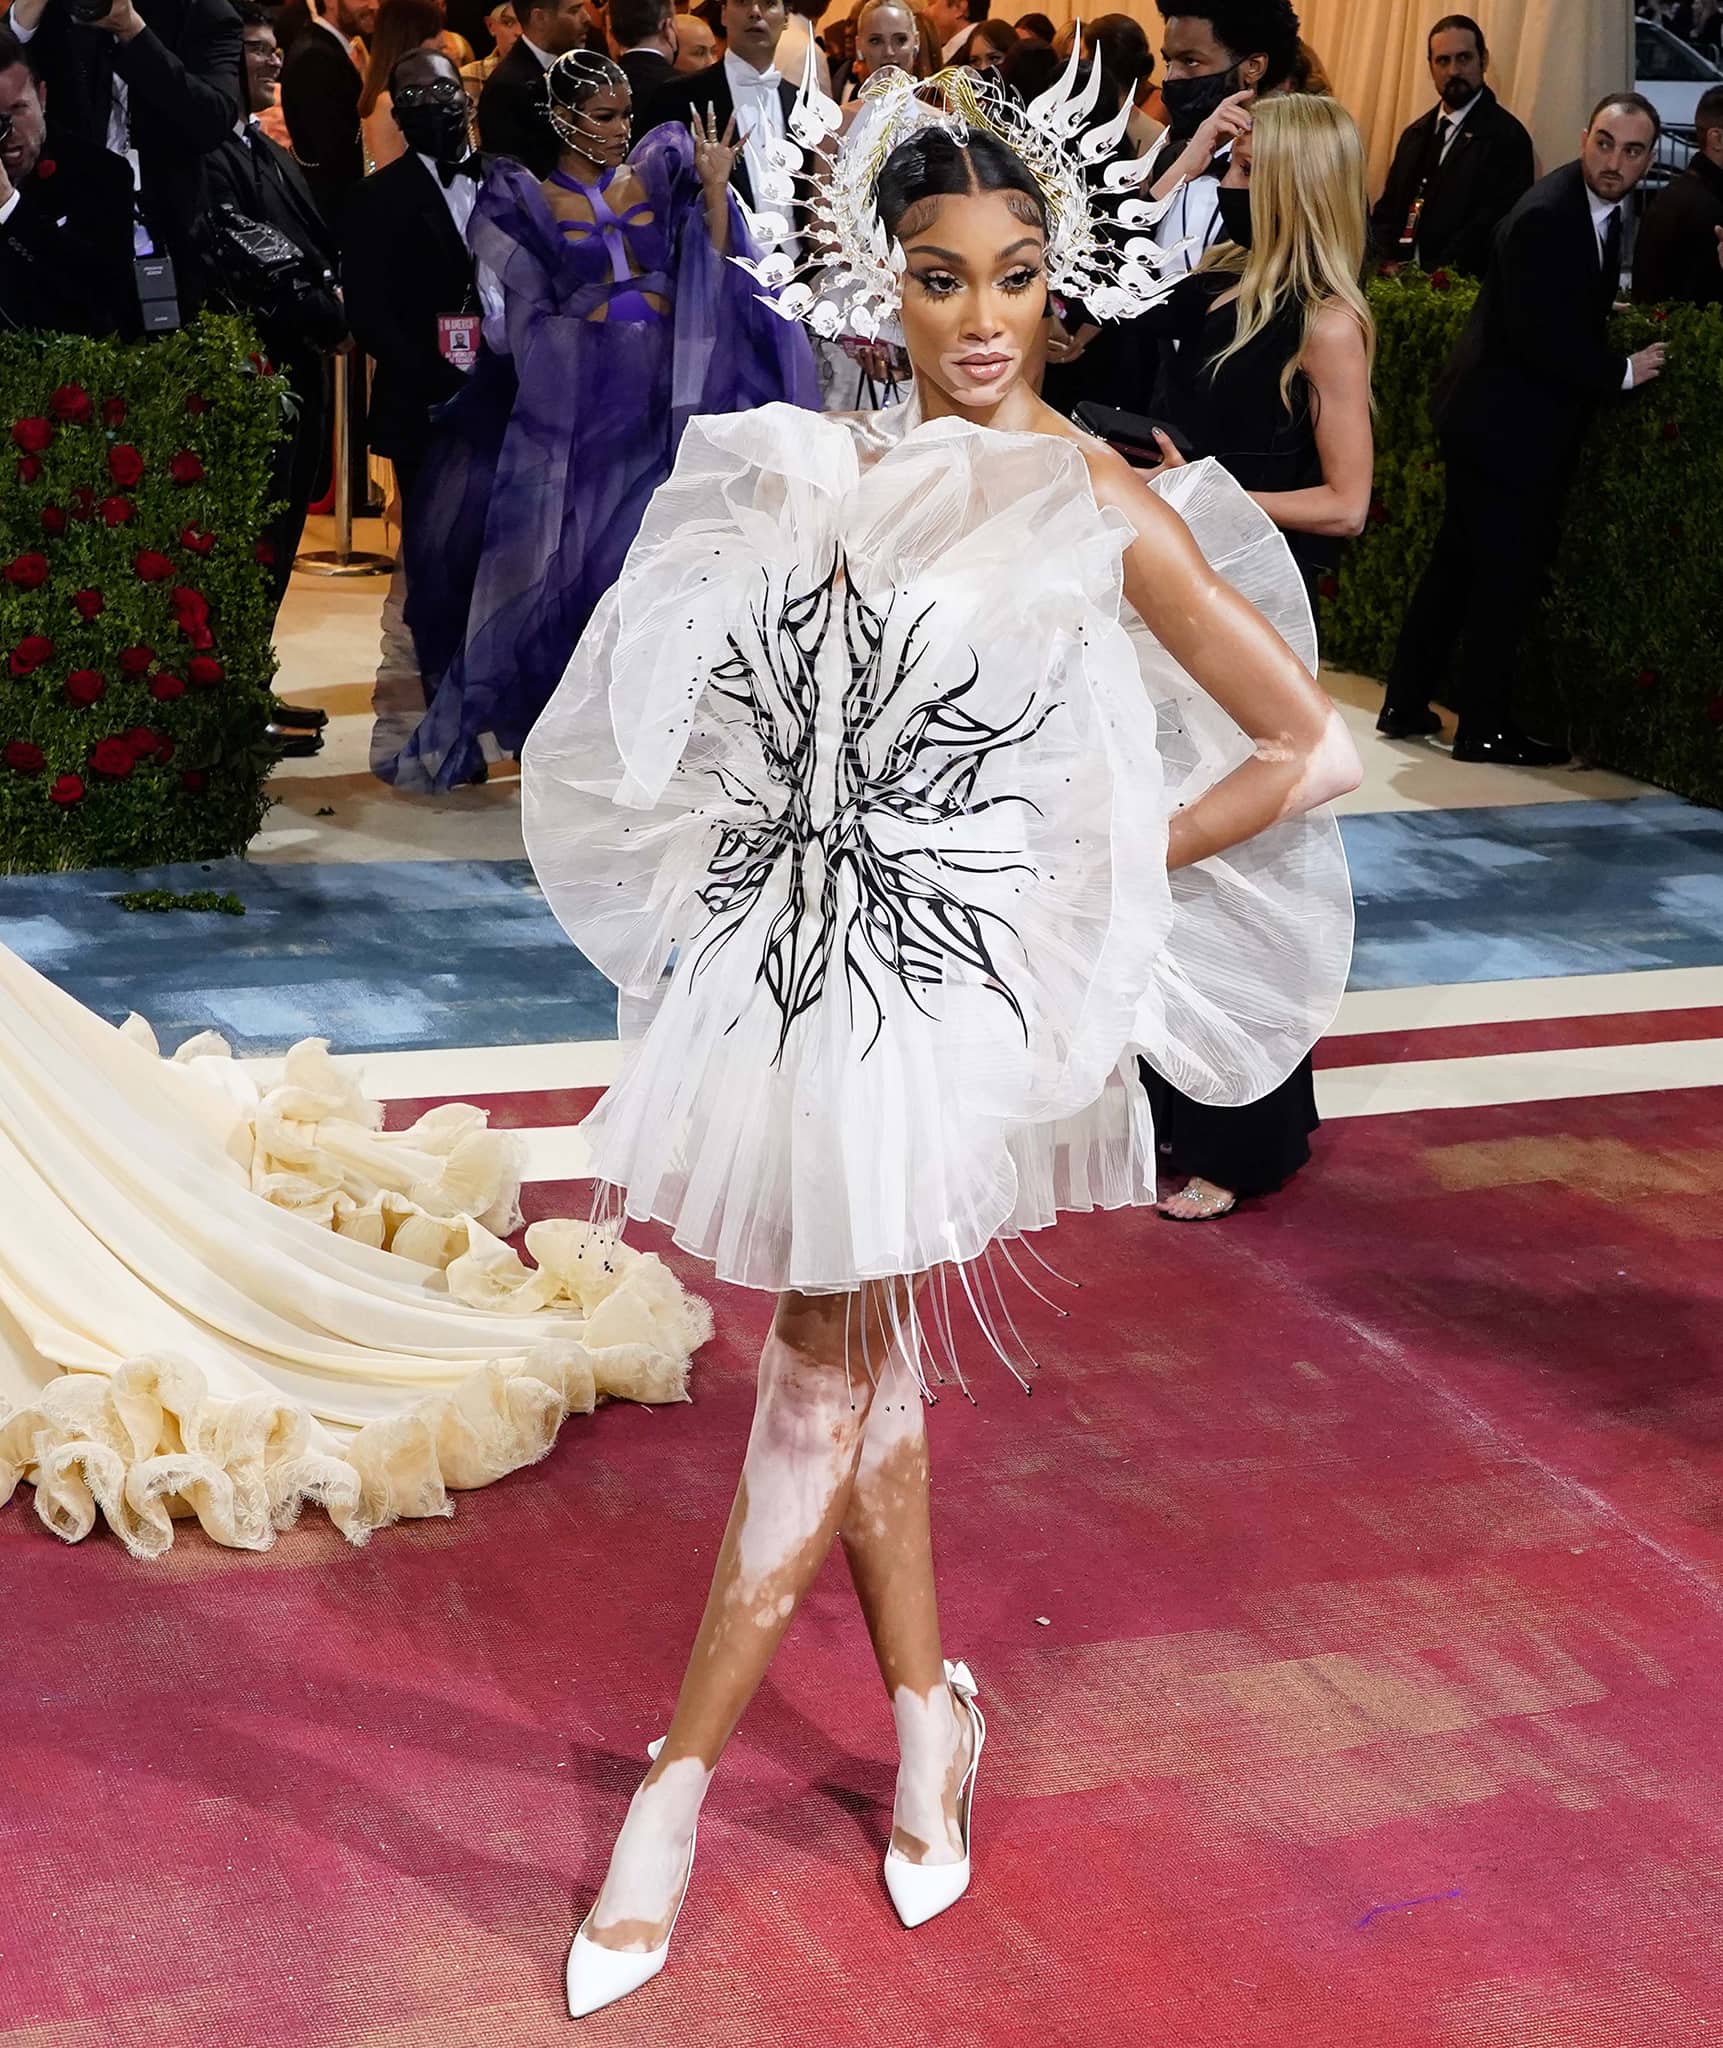 Winnie Harlow pairs her 3D floral mini dress with a kinetic crown headpiece